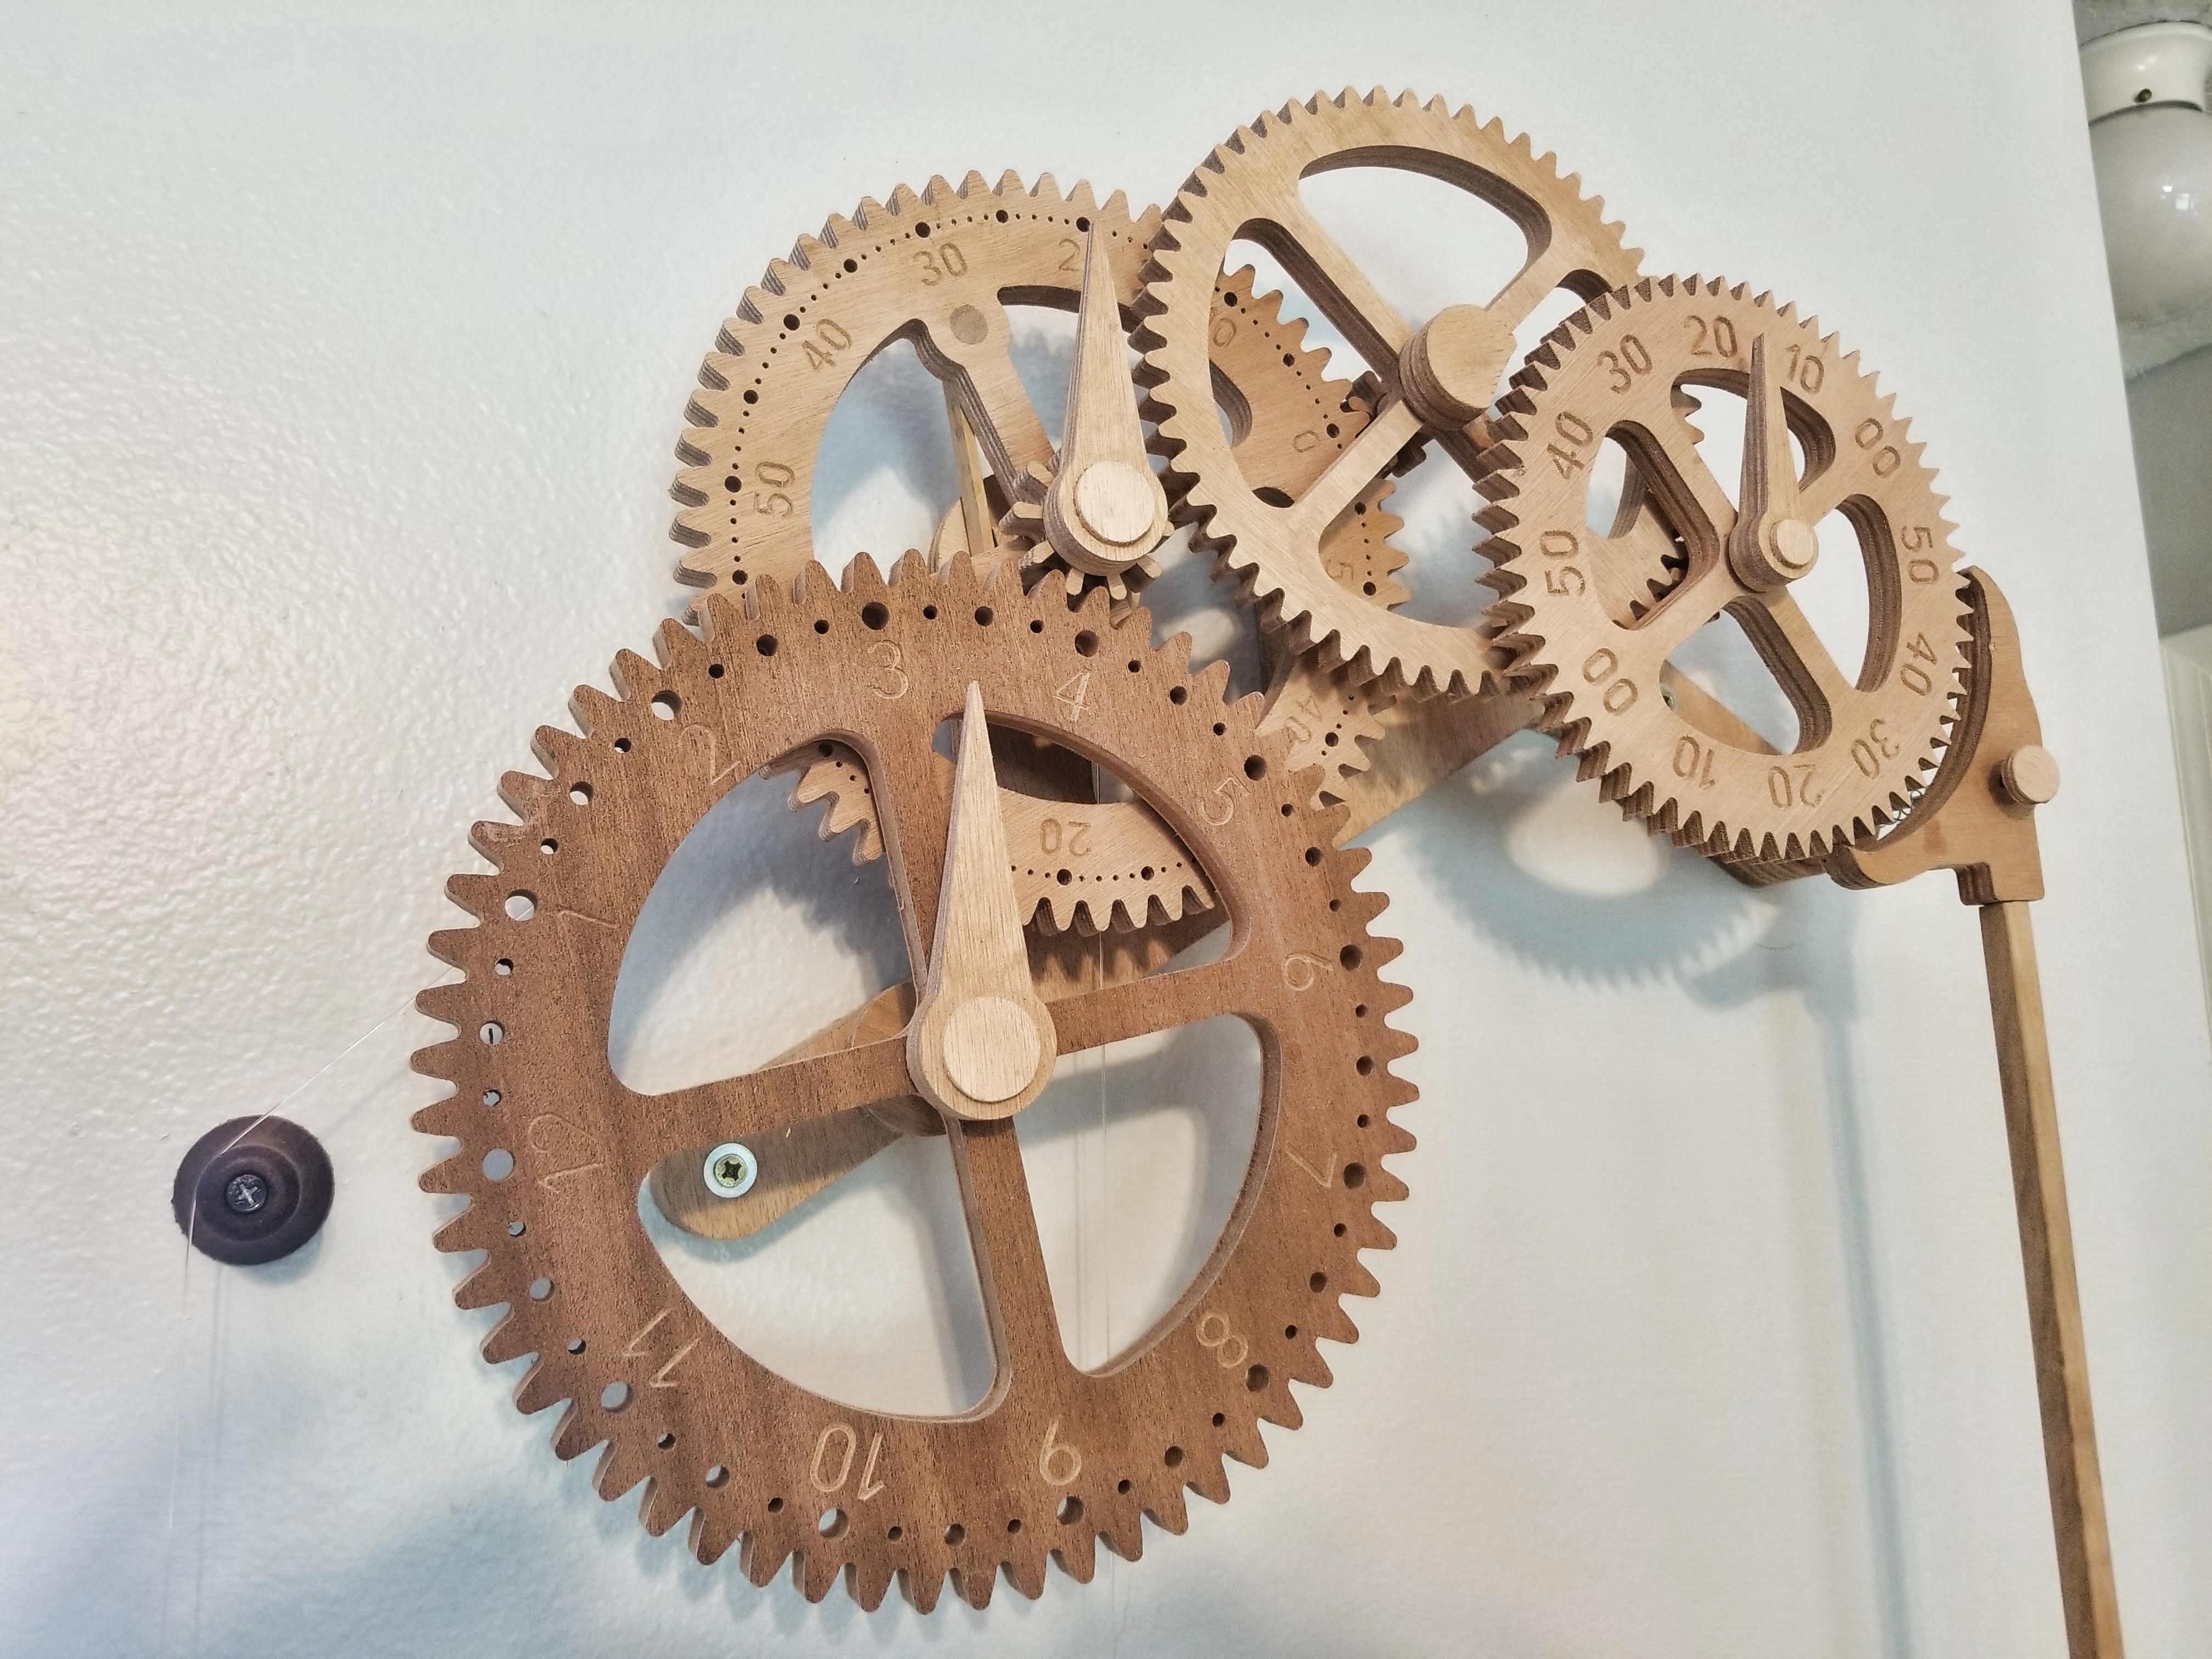 Making a wooden gear clock - Part 2 - Loxaco, Inc - with build pictures